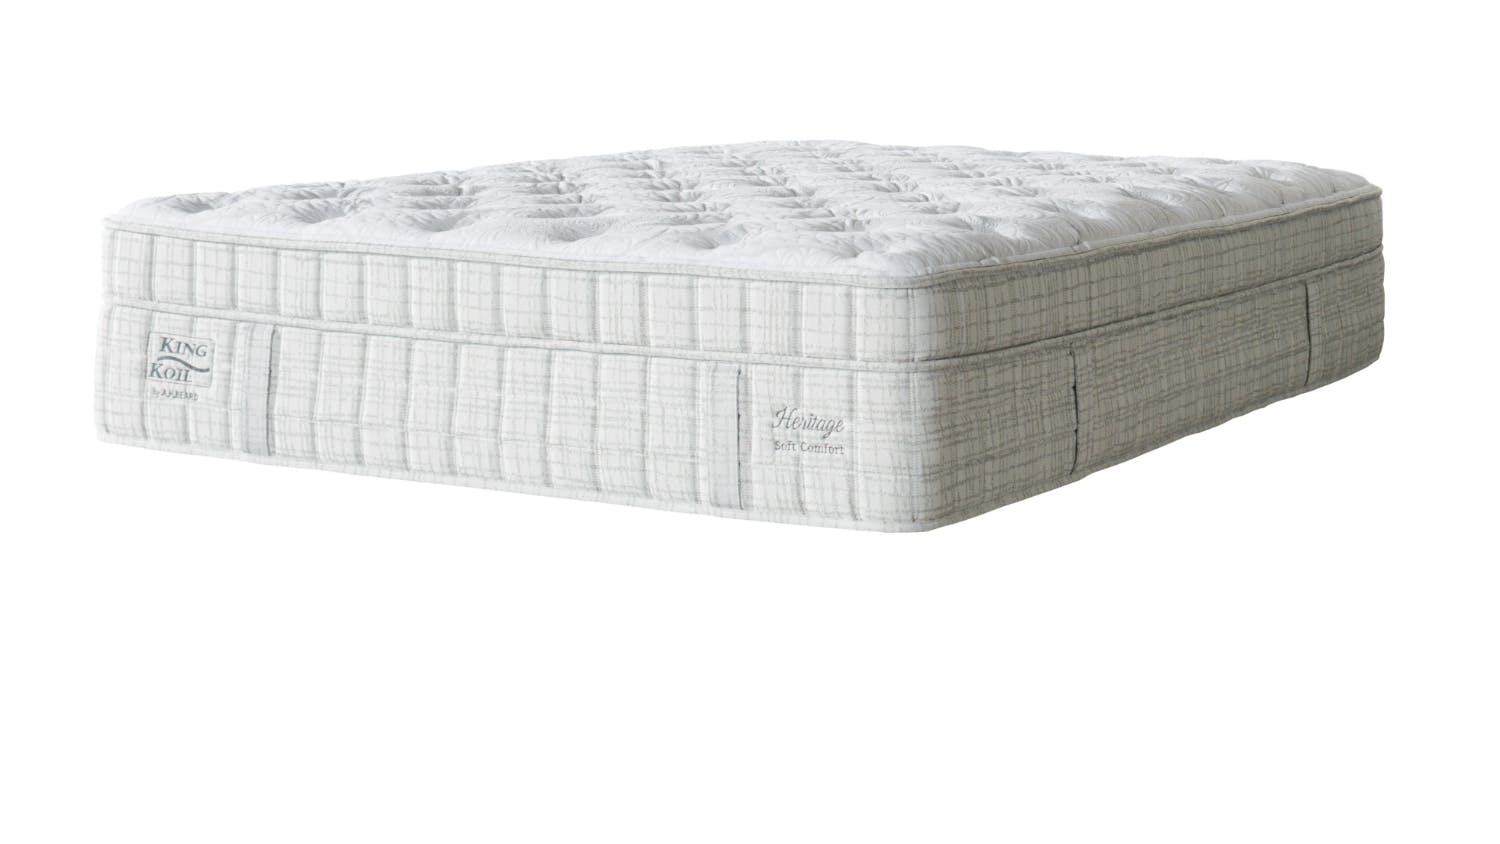 Heritage Soft Double Mattress by King Koil